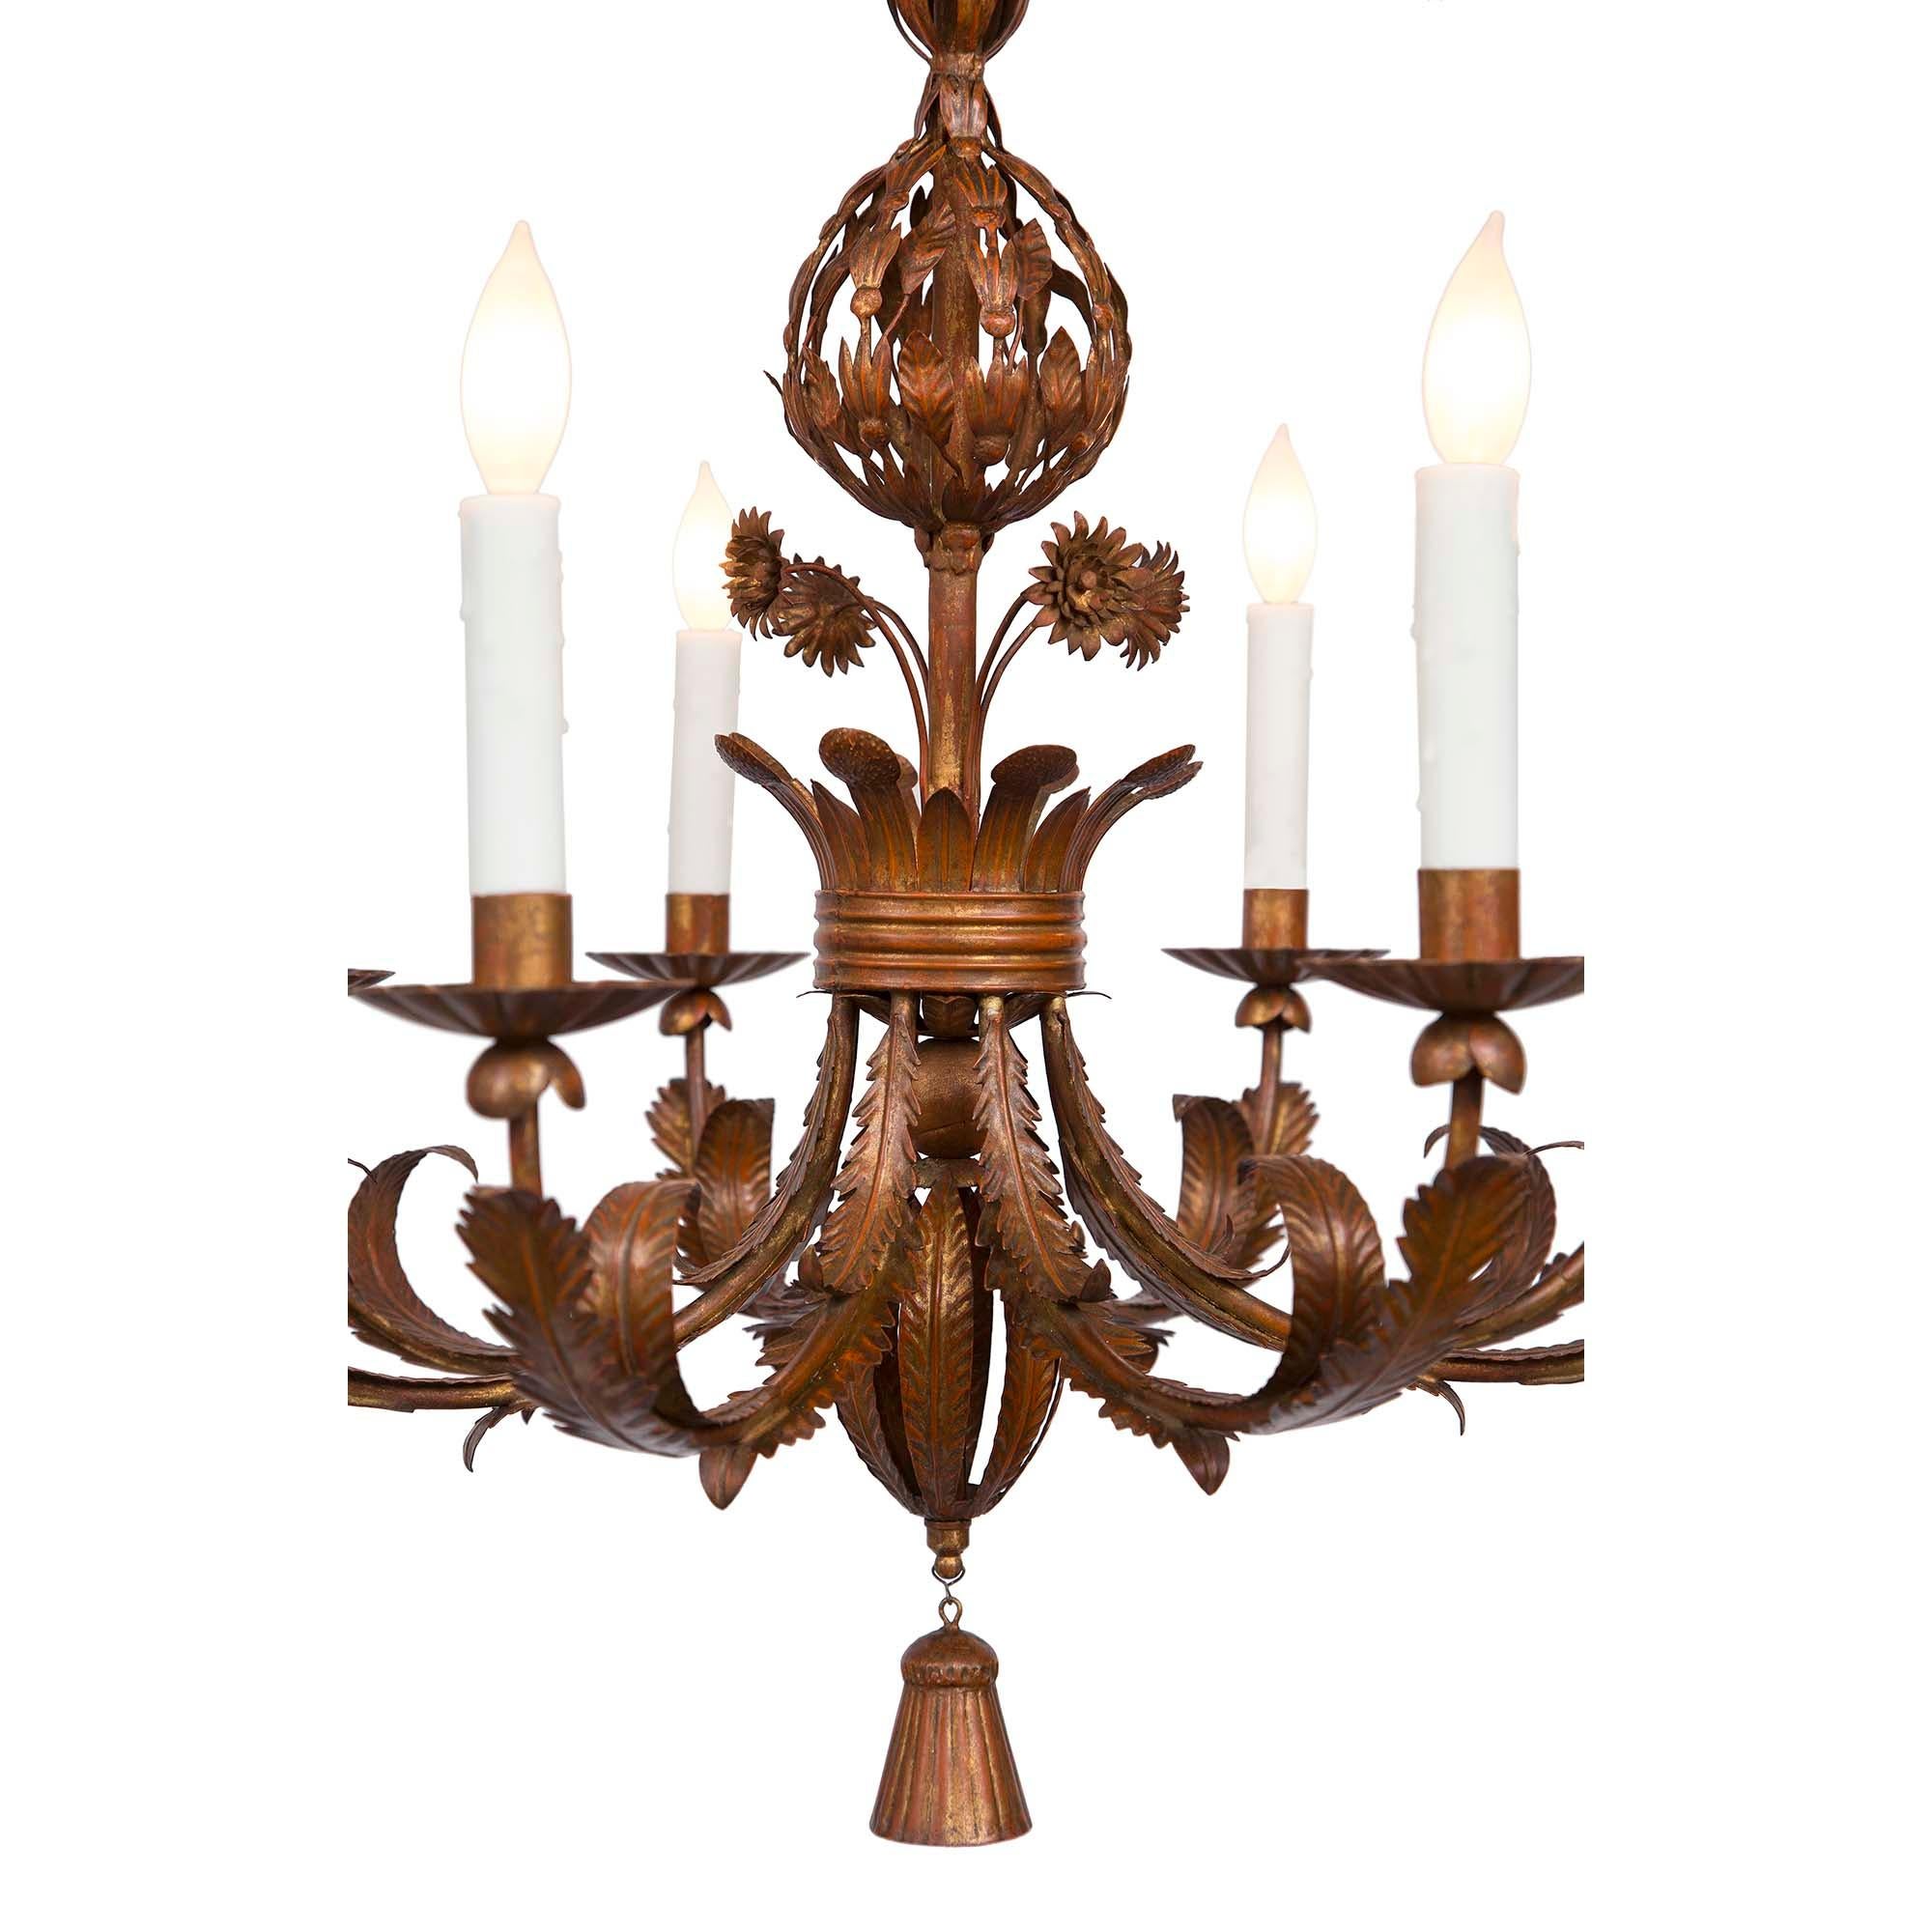 20th Century Italian Turn of the Century Pressed Metal Eight-Arm Chandelier For Sale